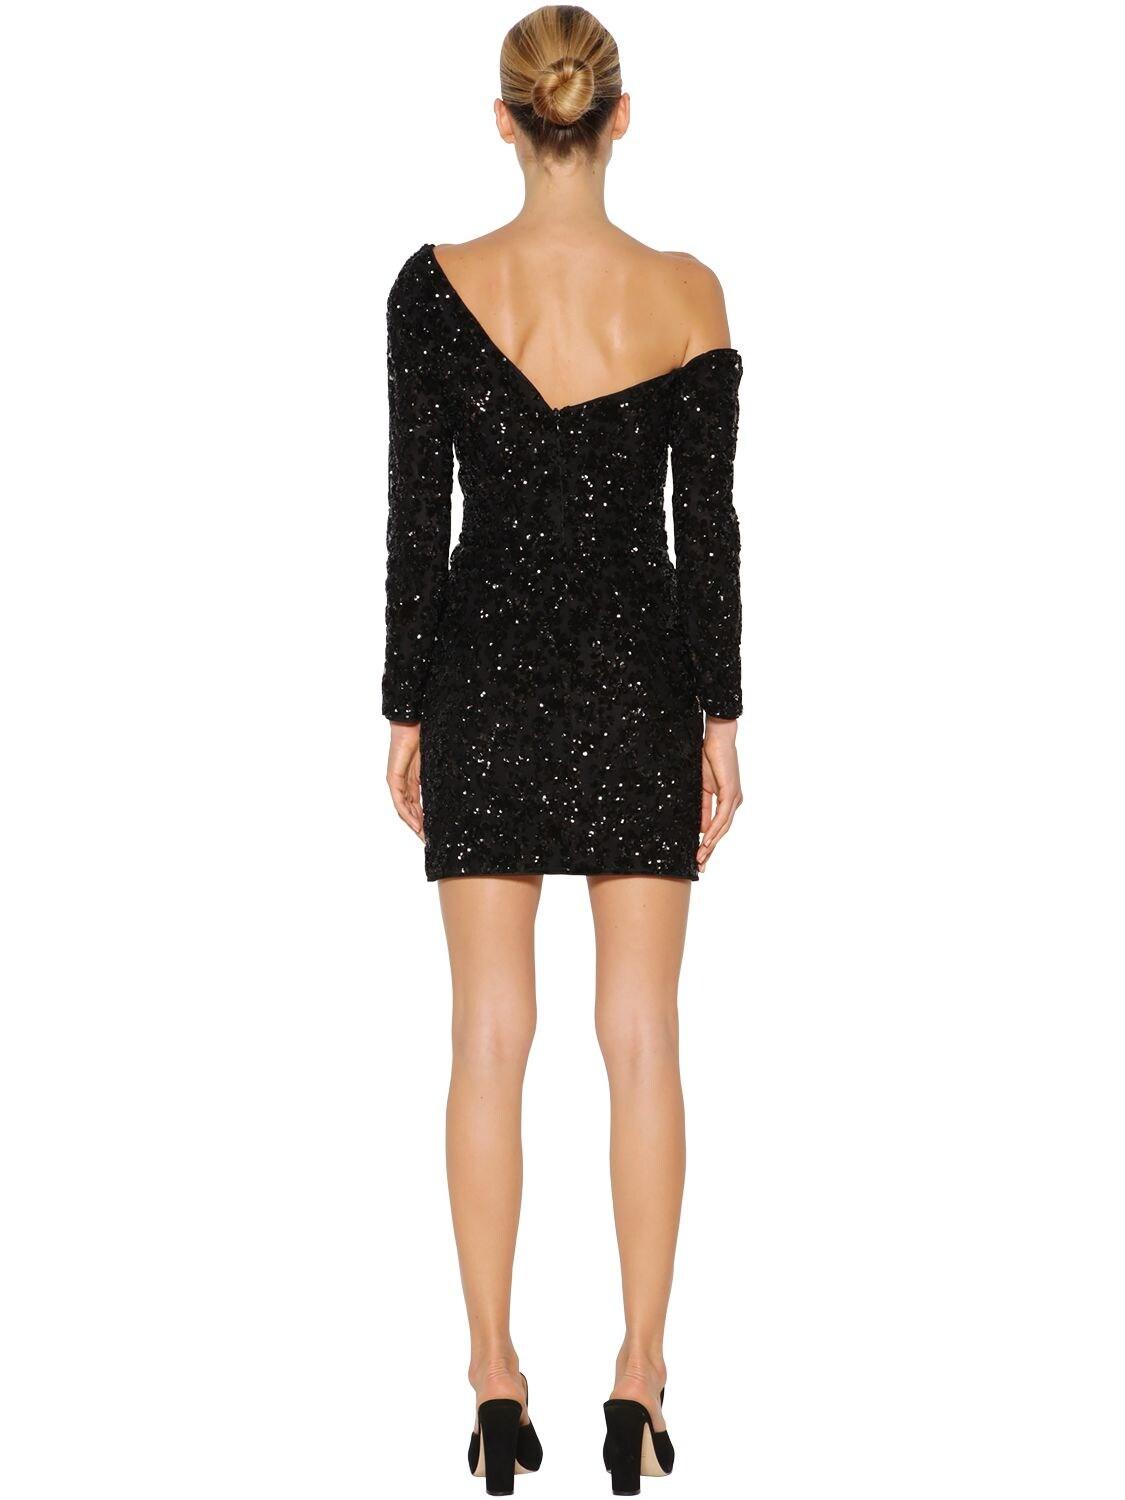 Self-Portrait Synthetic Sequin Ruffle Mini Dress in Black - Save 49% - Lyst